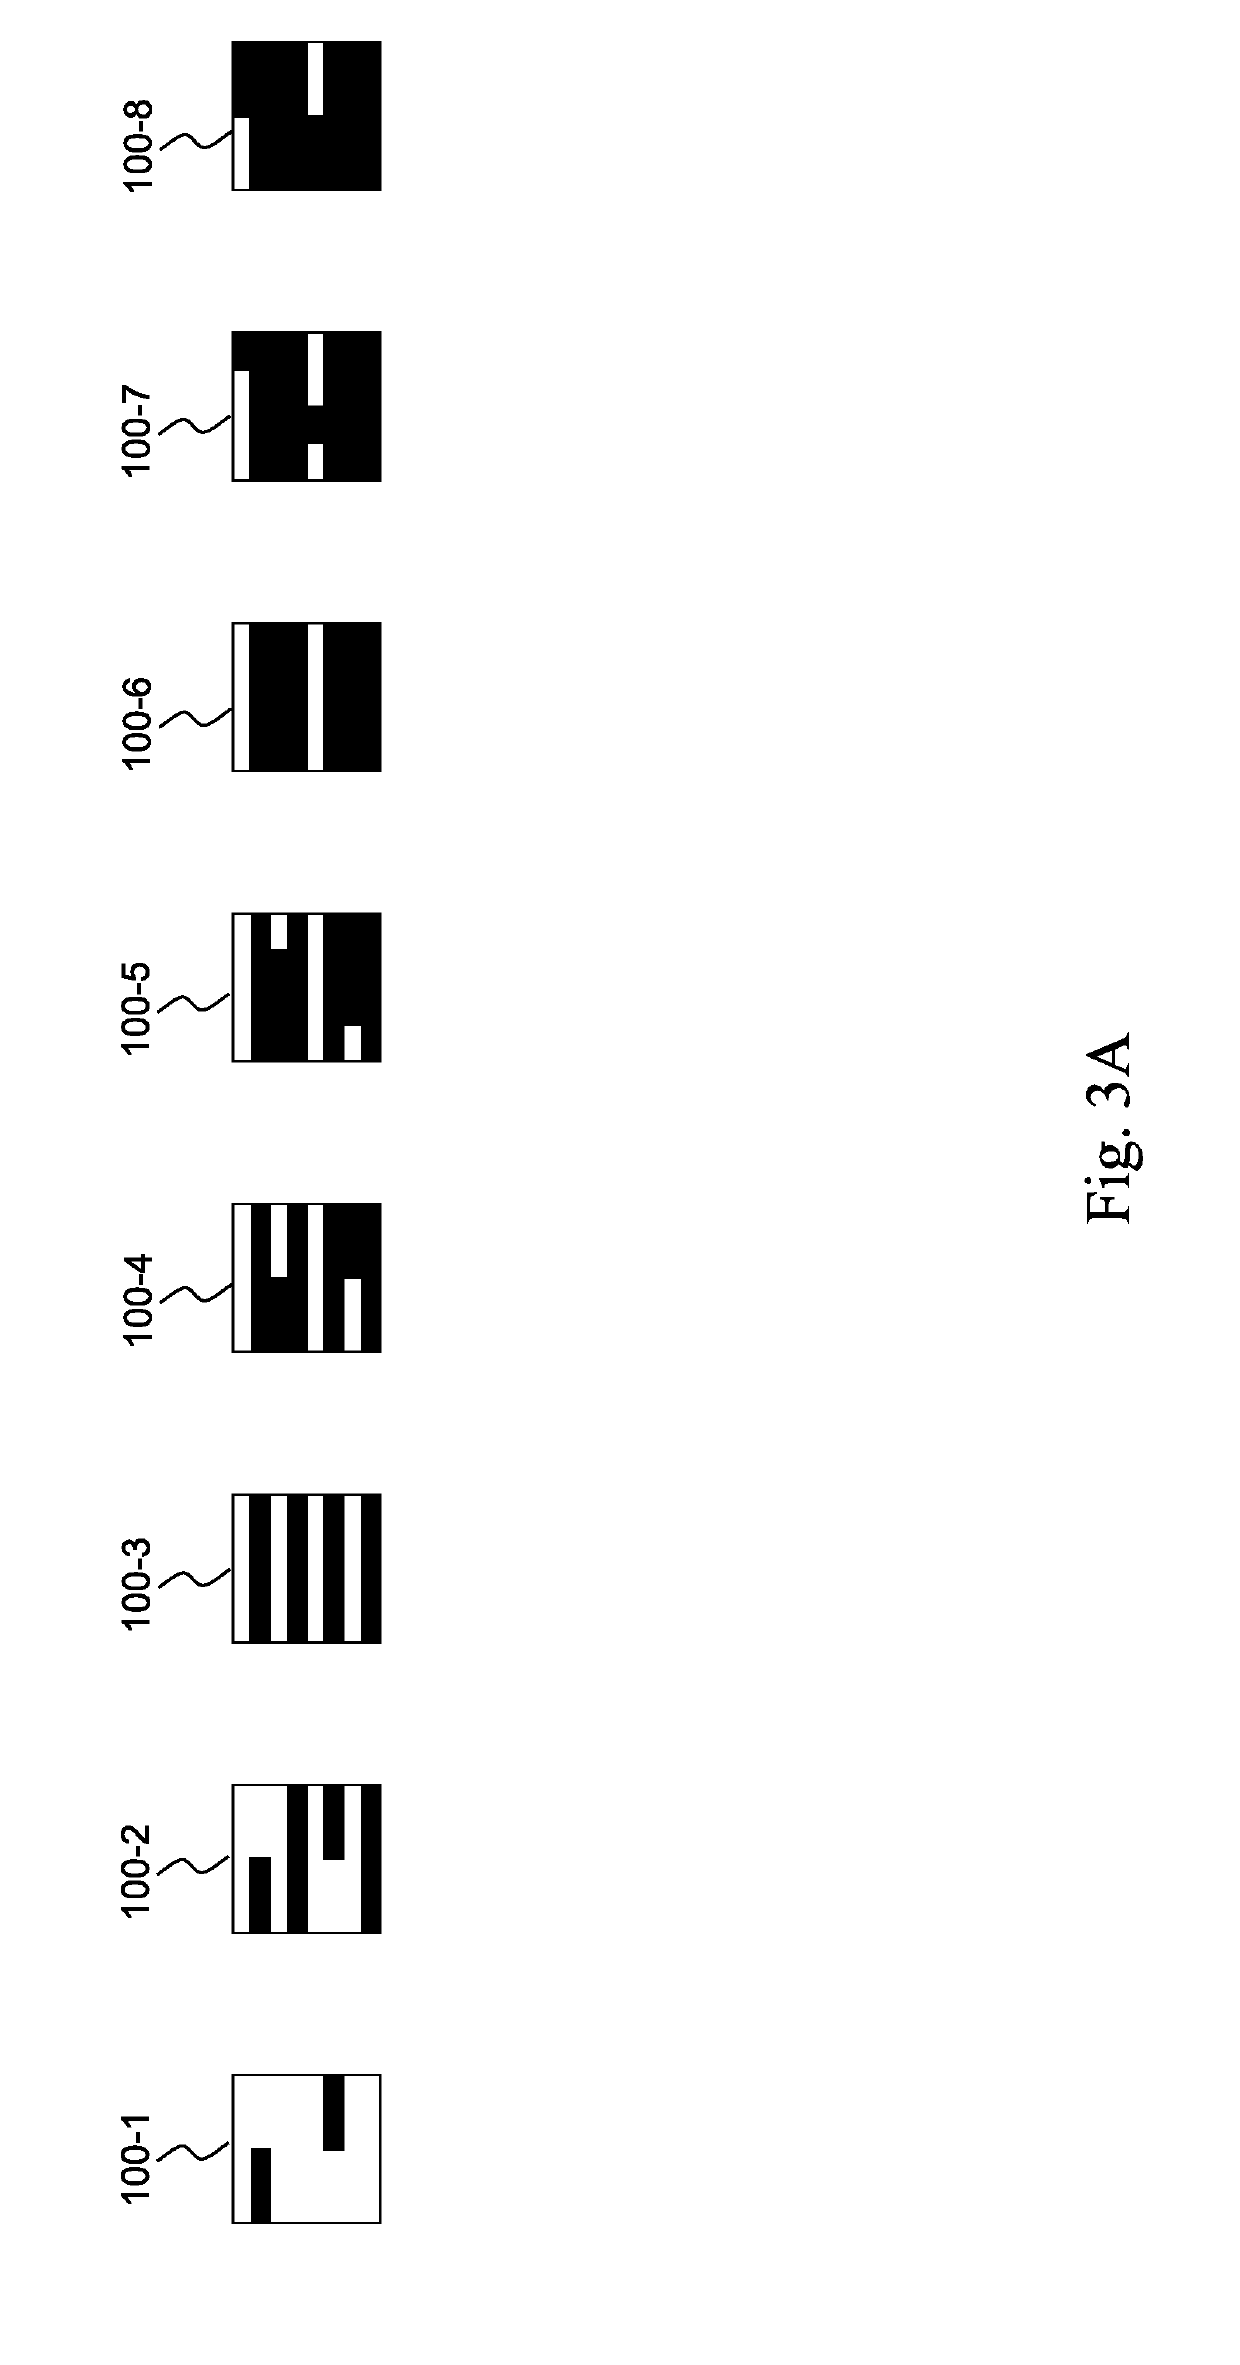 Method for Calibrating a Device for Measuring the Concentration of a Biological Compound